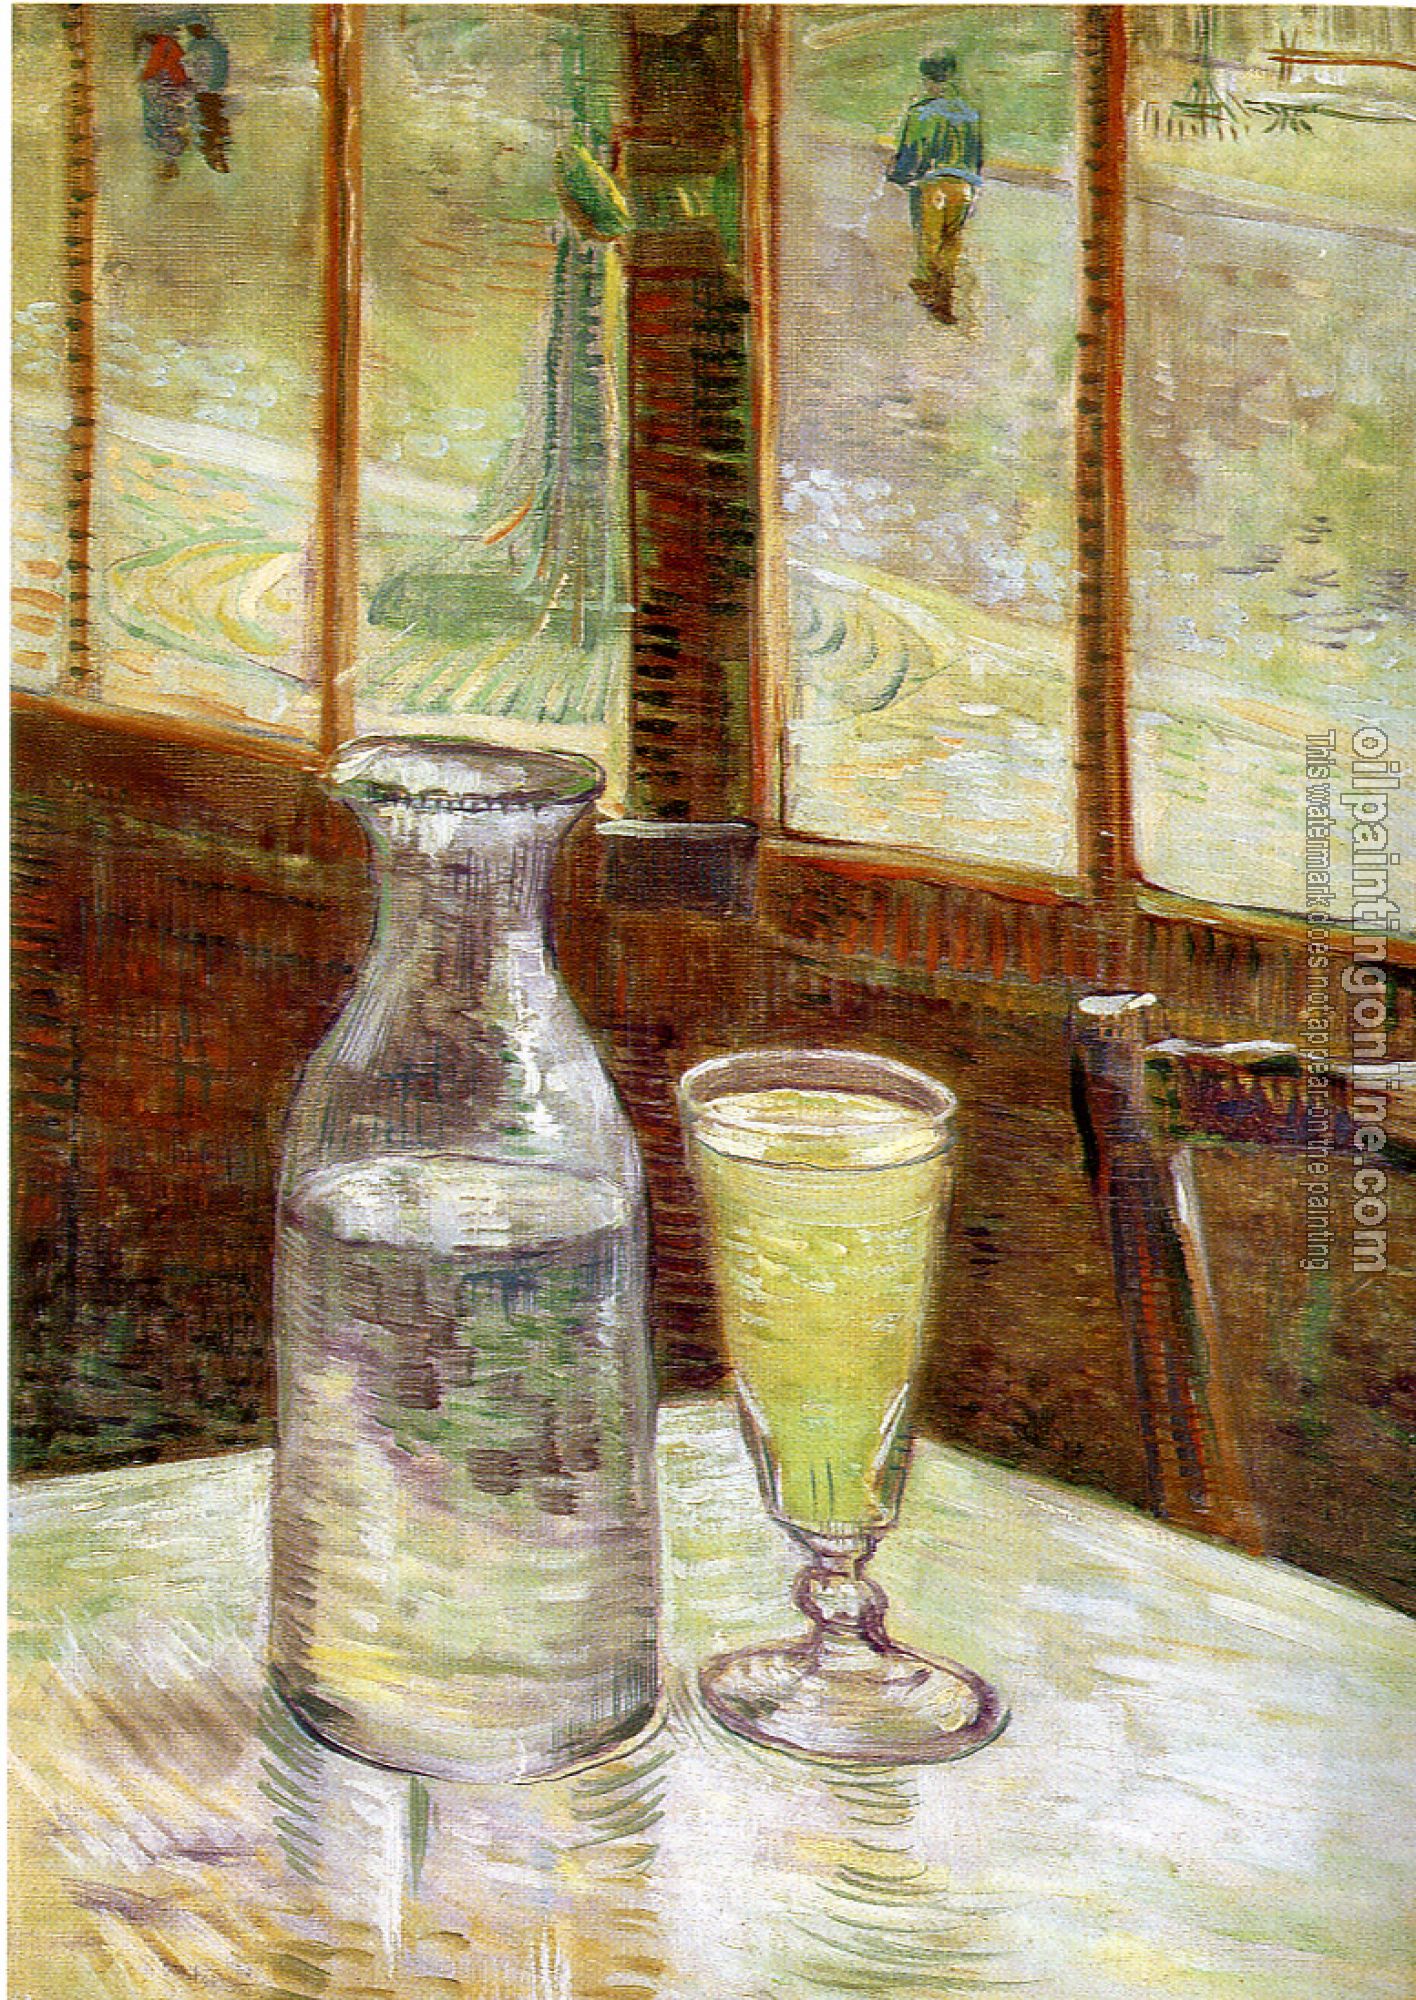 Gogh, Vincent van - A Table in front of a Window with a Glass of Absinthe and a Carafe